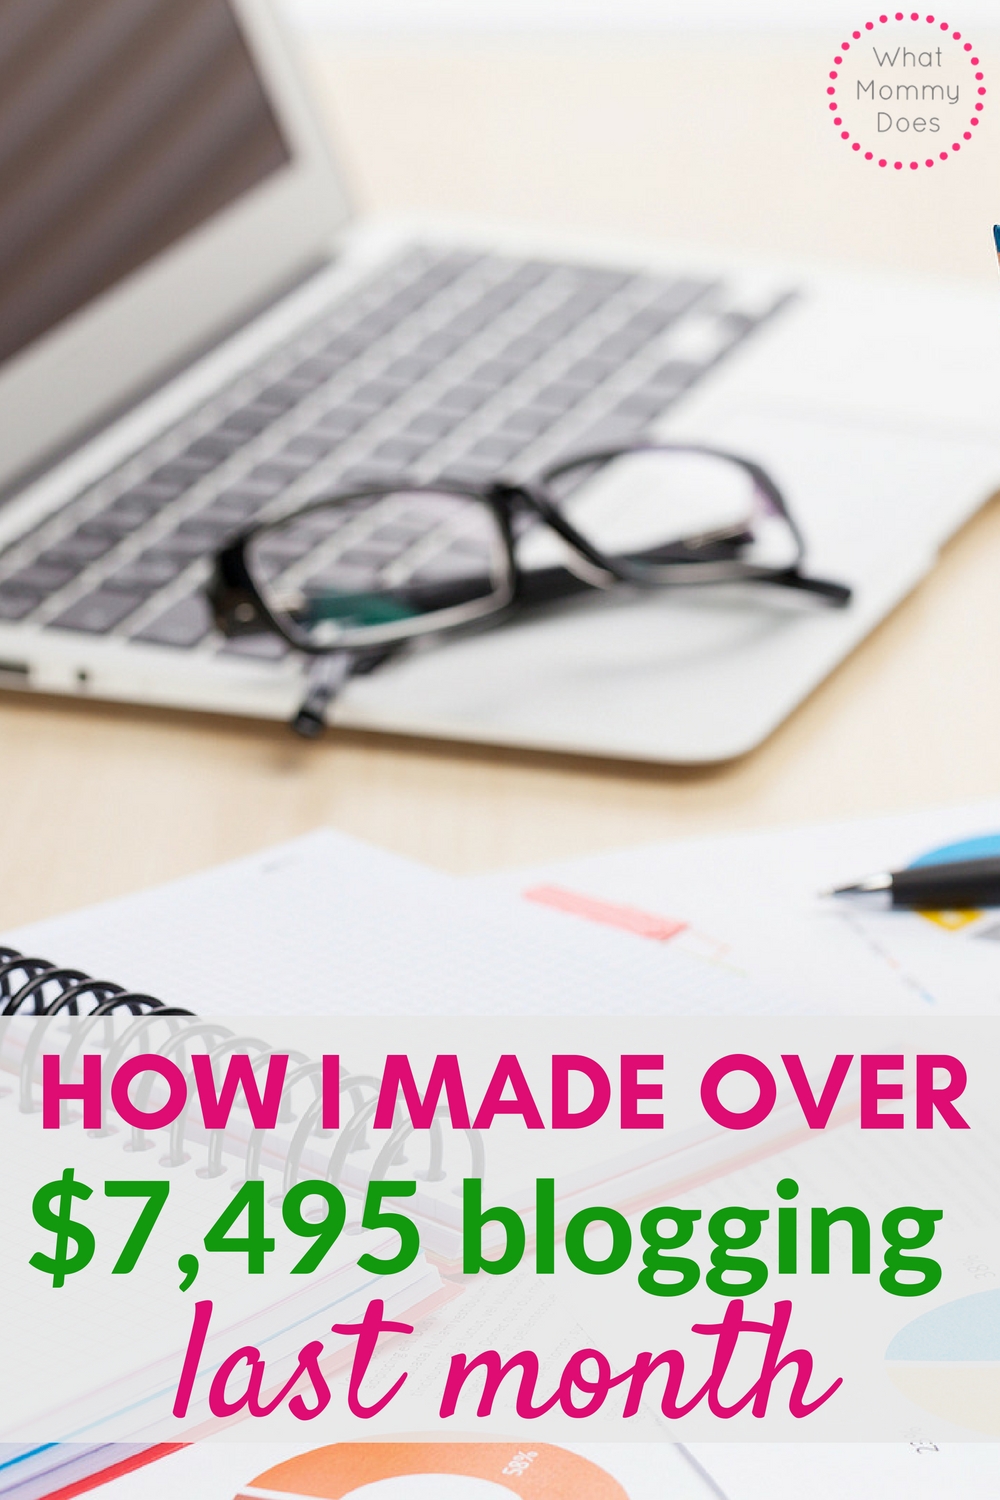 October 2015 Blogging Income Report - Great tips on how to get started blogging for money!